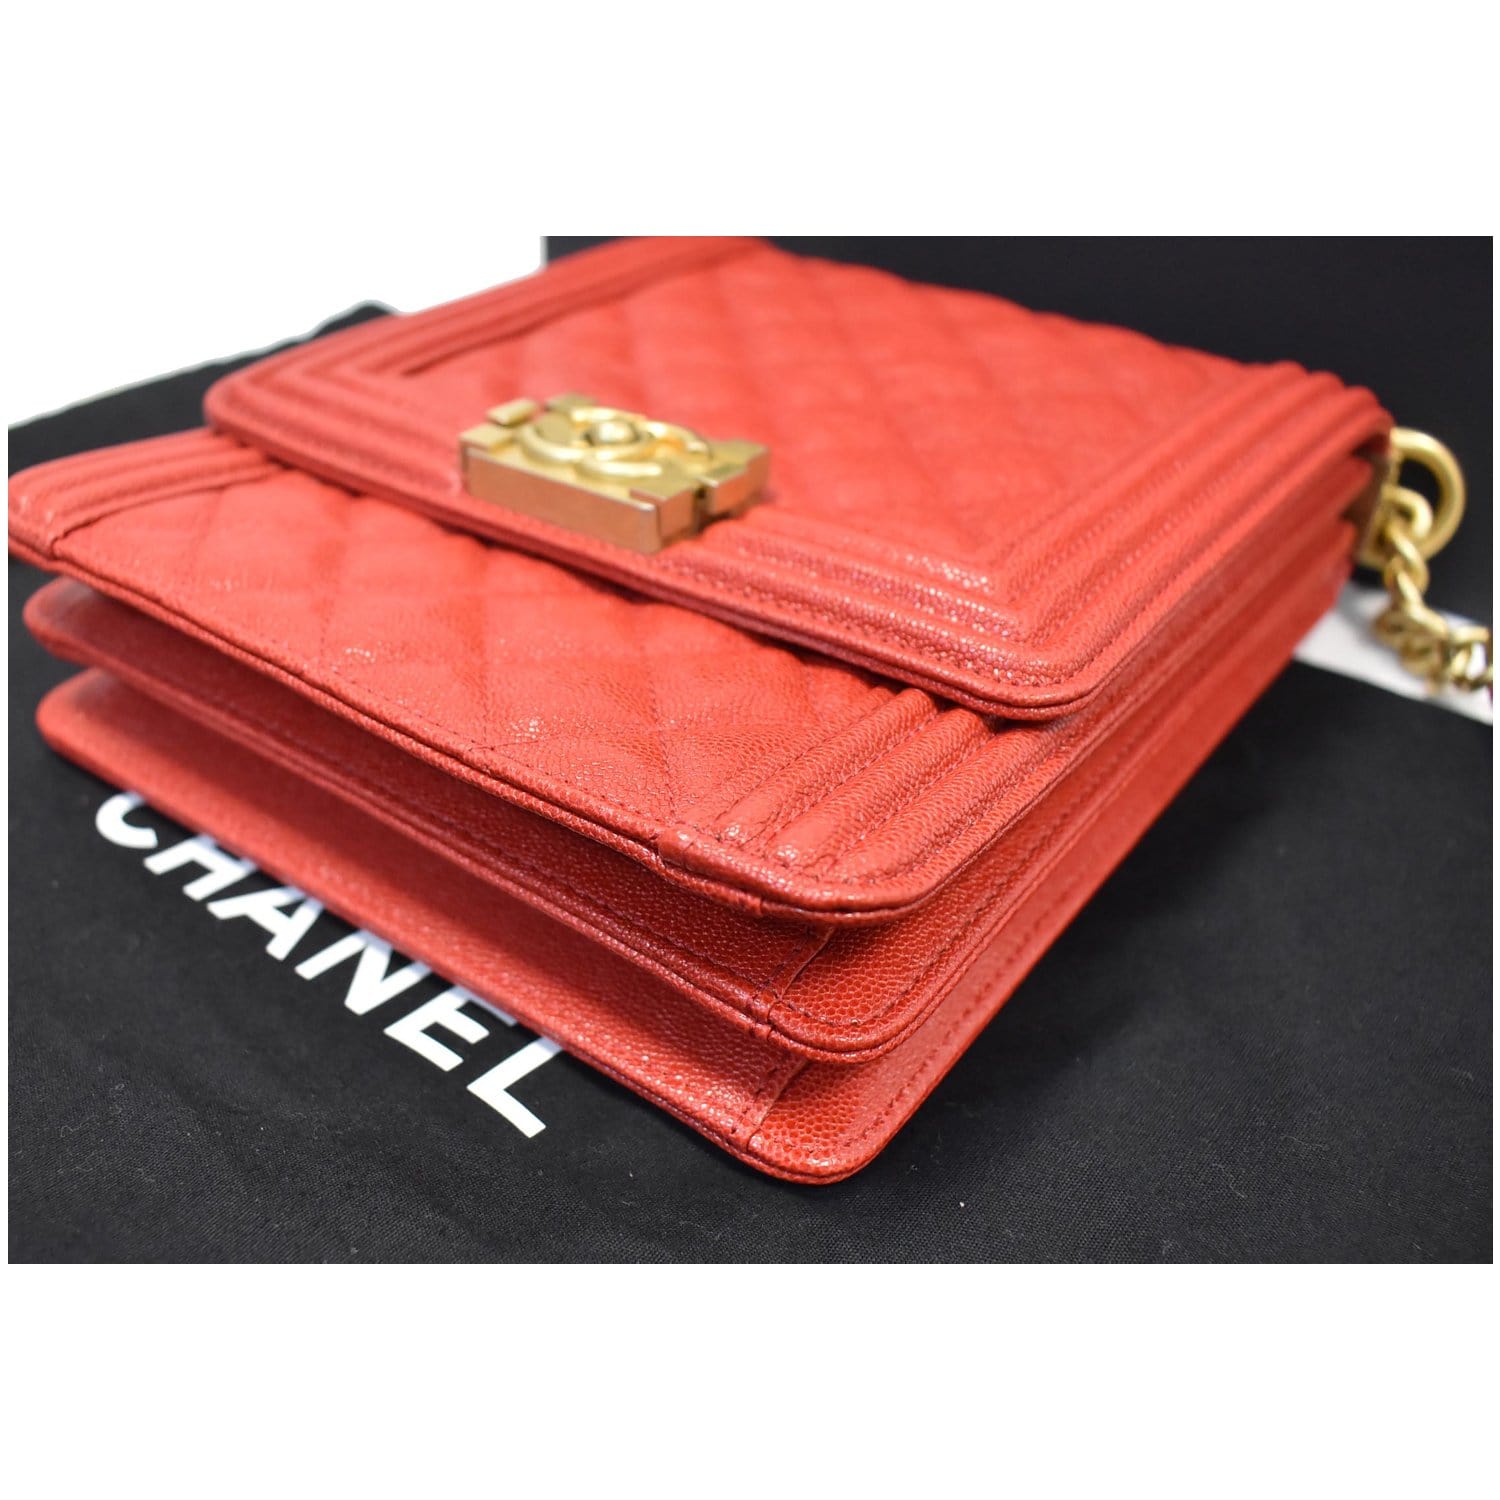 Chanel North-South Boy Quilted Caviar Leather Shoulder Bag